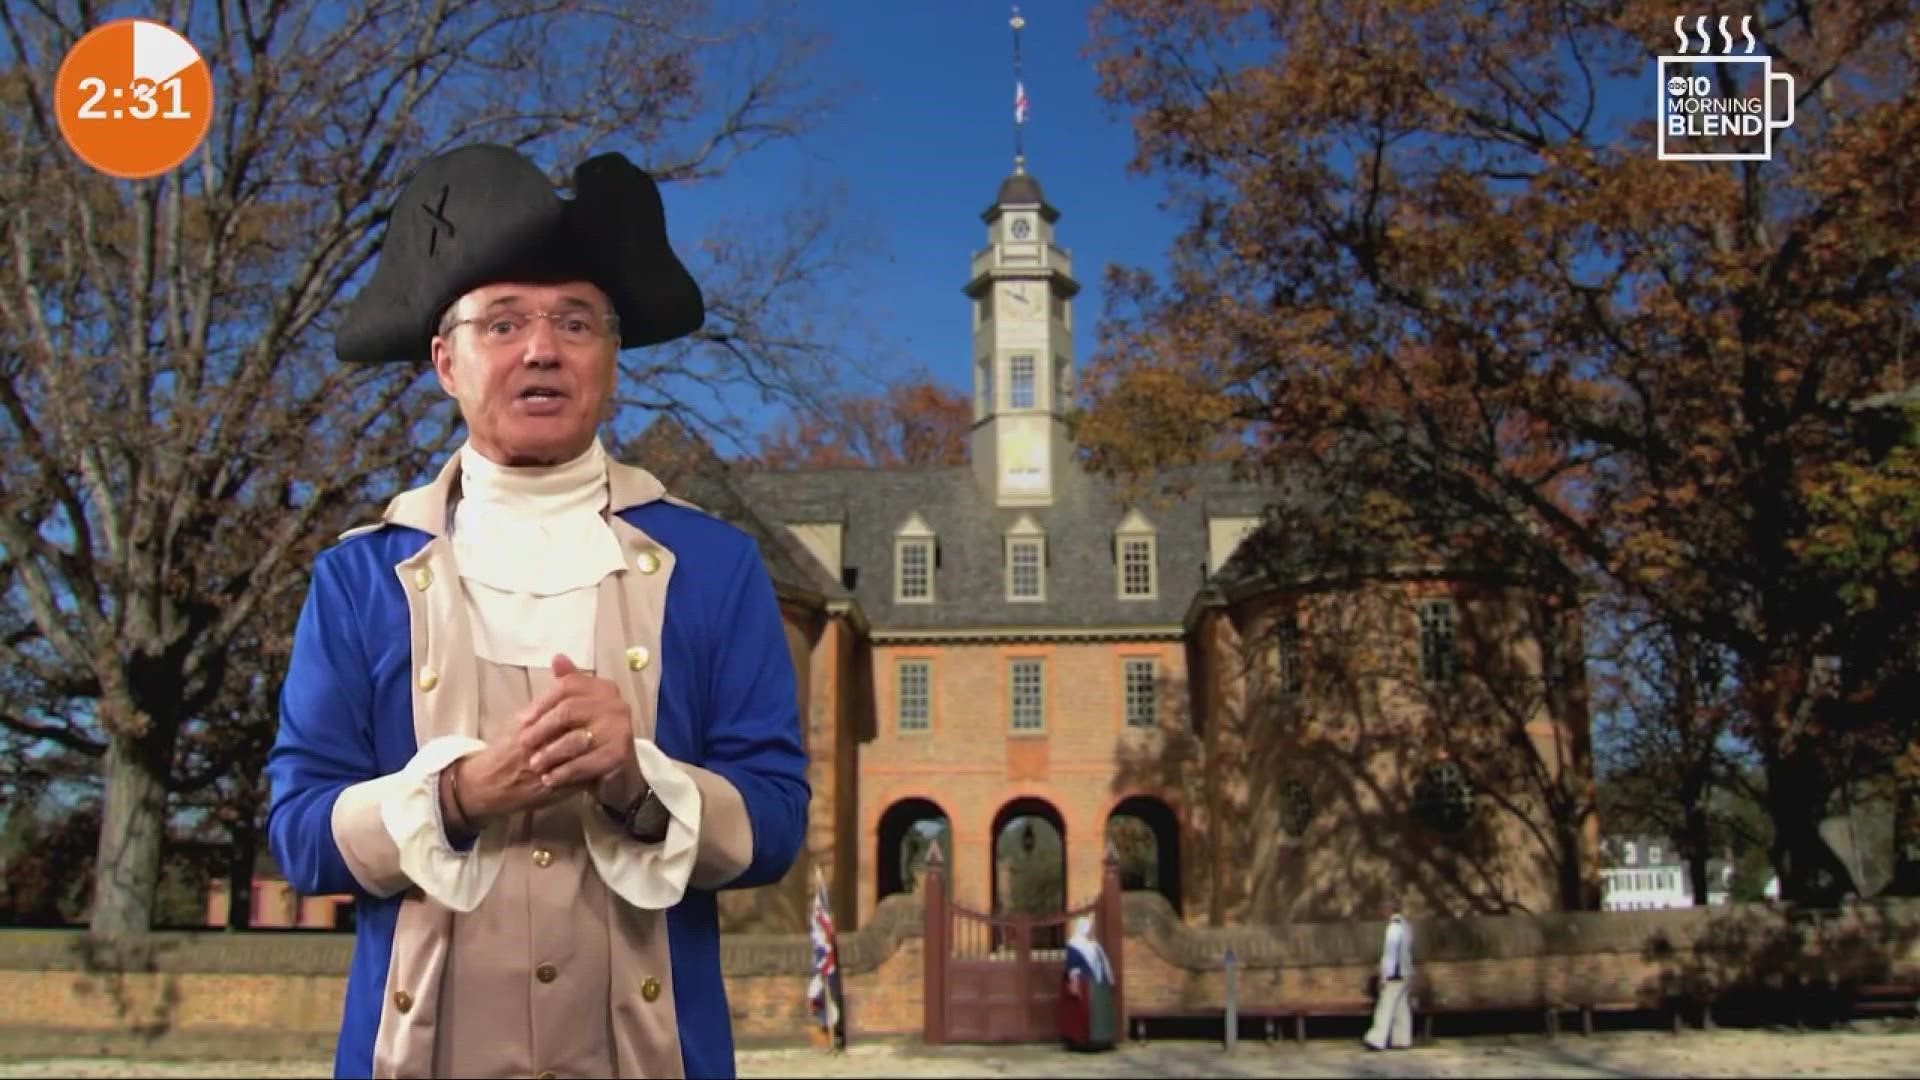 ABC10's Walt Gray explains the American Revolution in under three minutes.